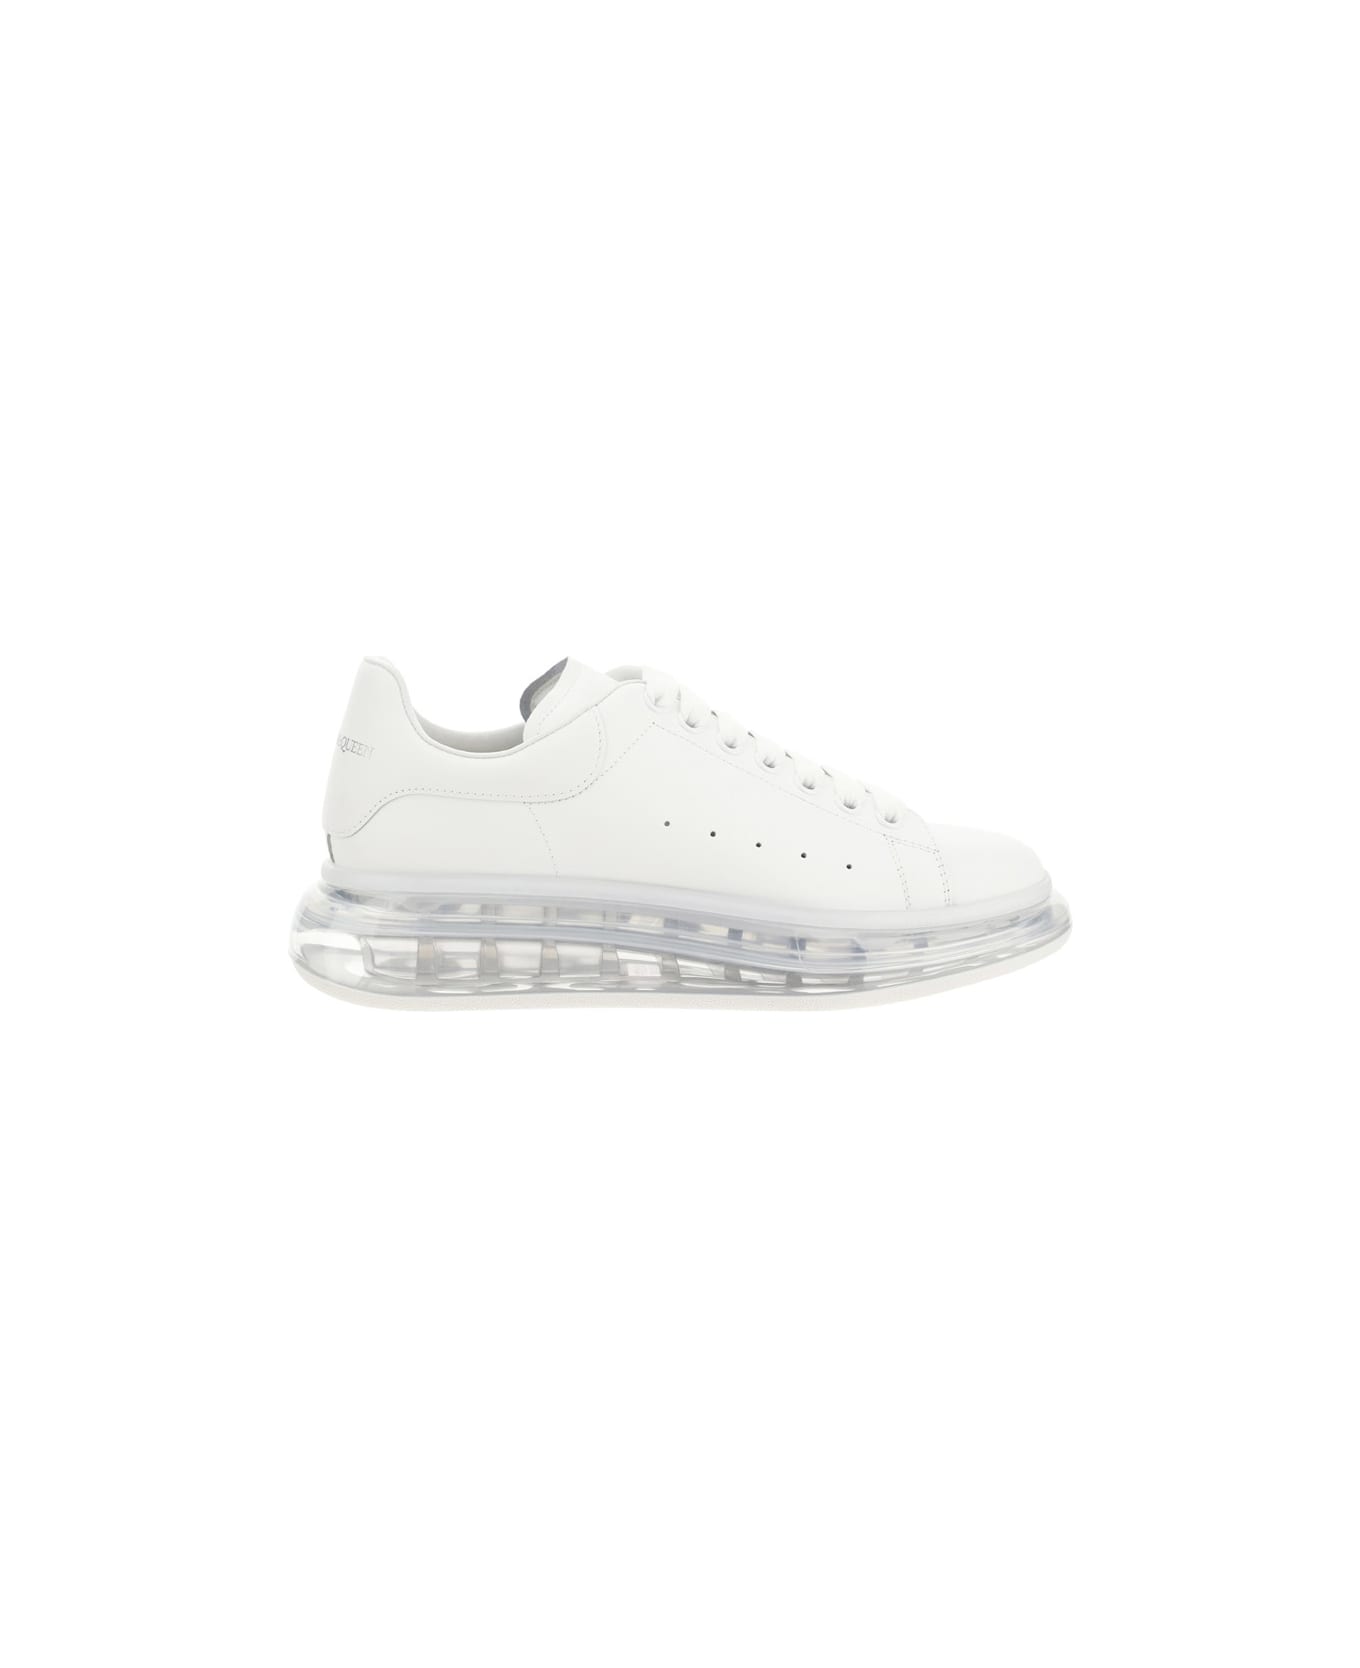 Alexander McQueen Oversized Sole Leather Sneakers - White/white/white